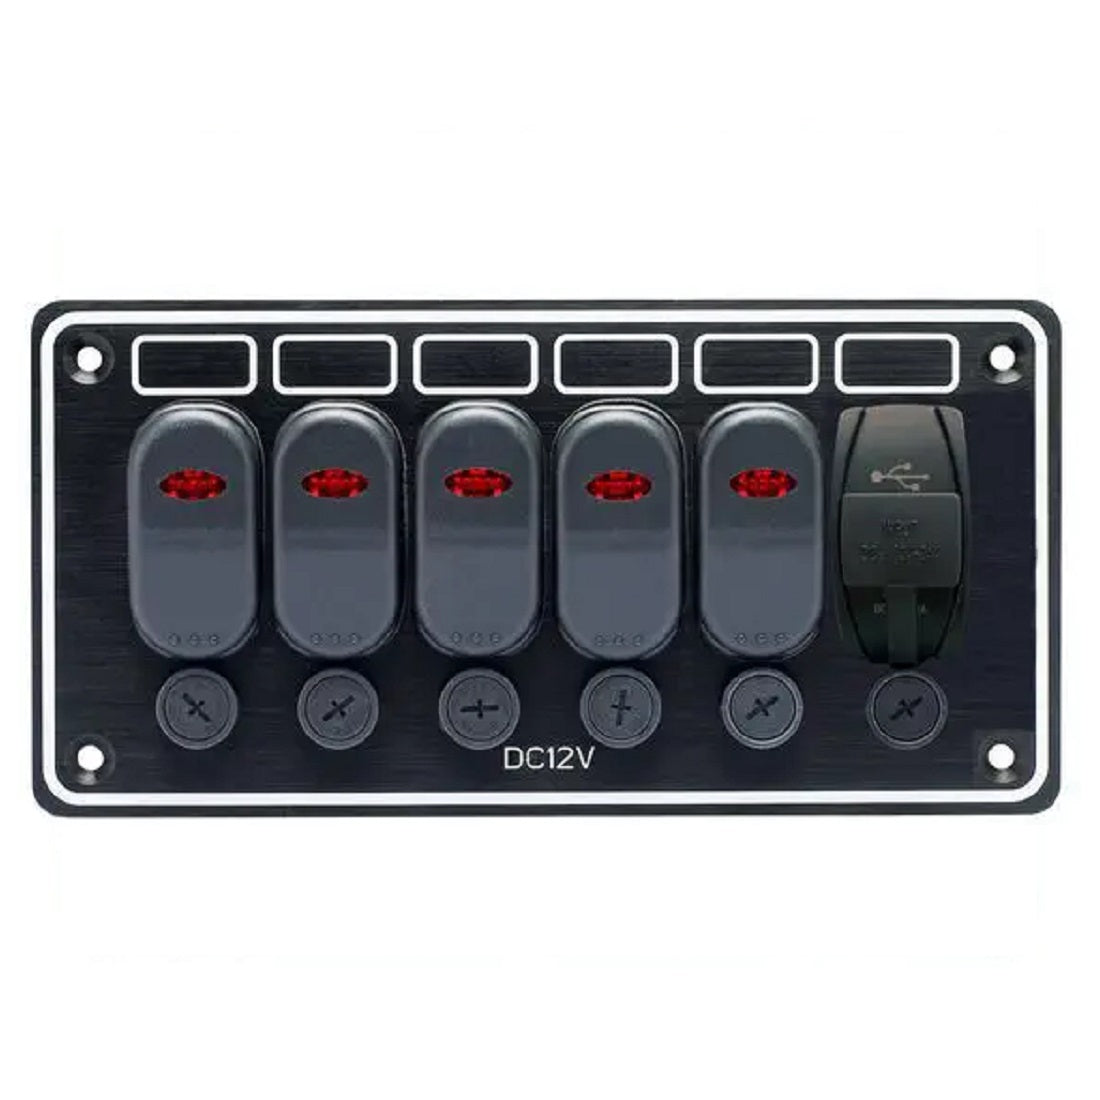 Waterproof Switch Panel with USB